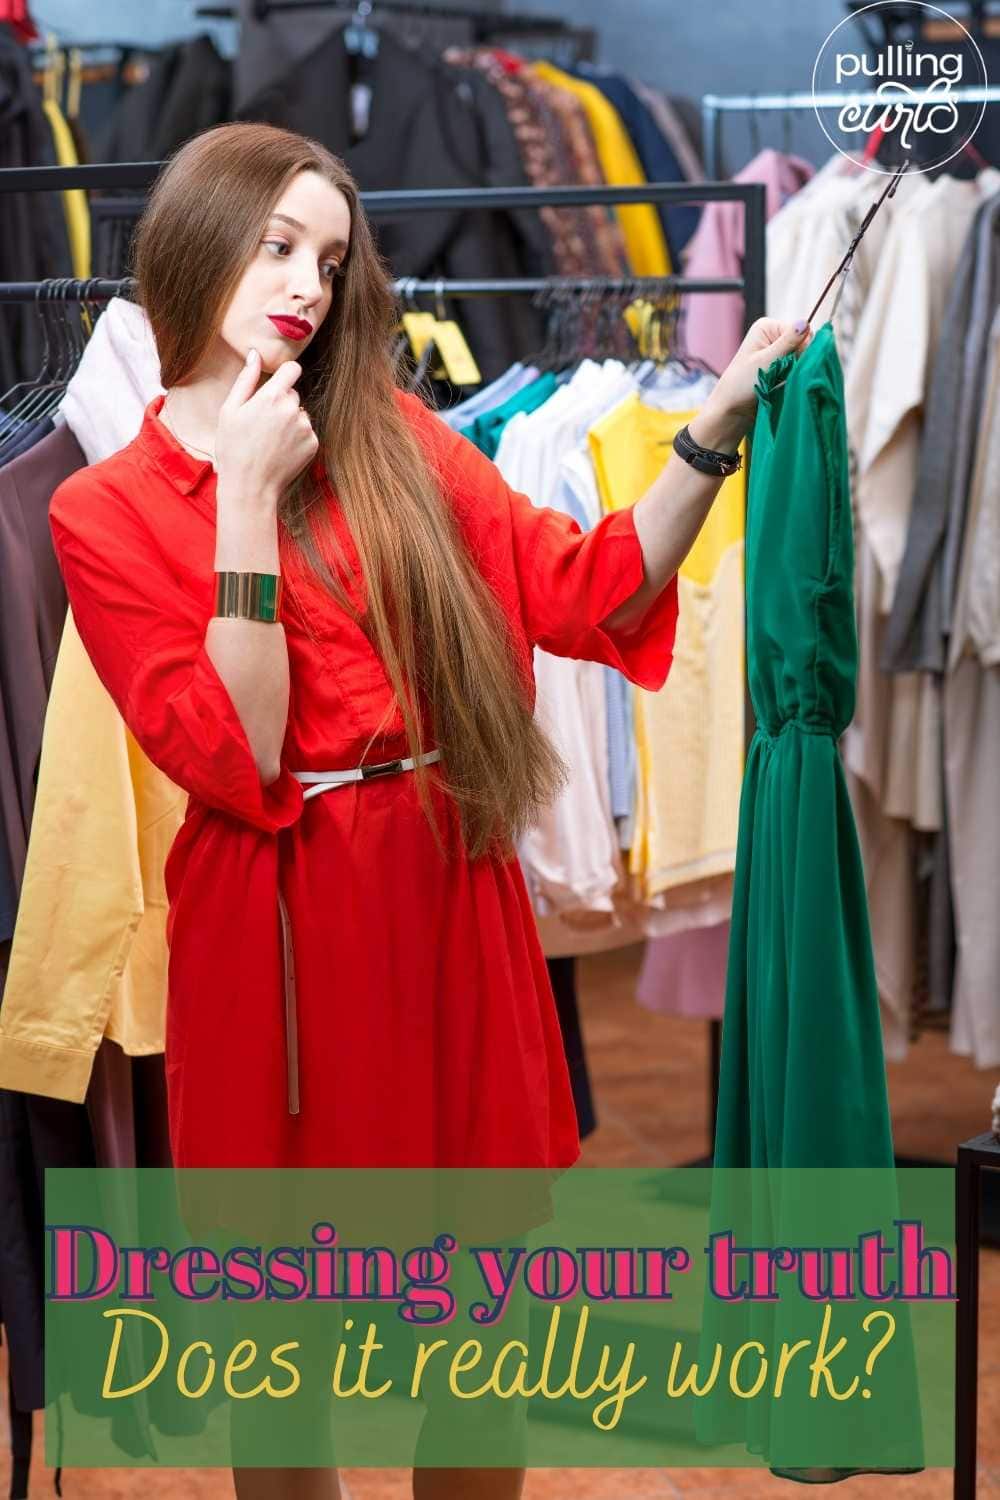 Woman in red dress shopping, holding a green dress. via @pullingcurls